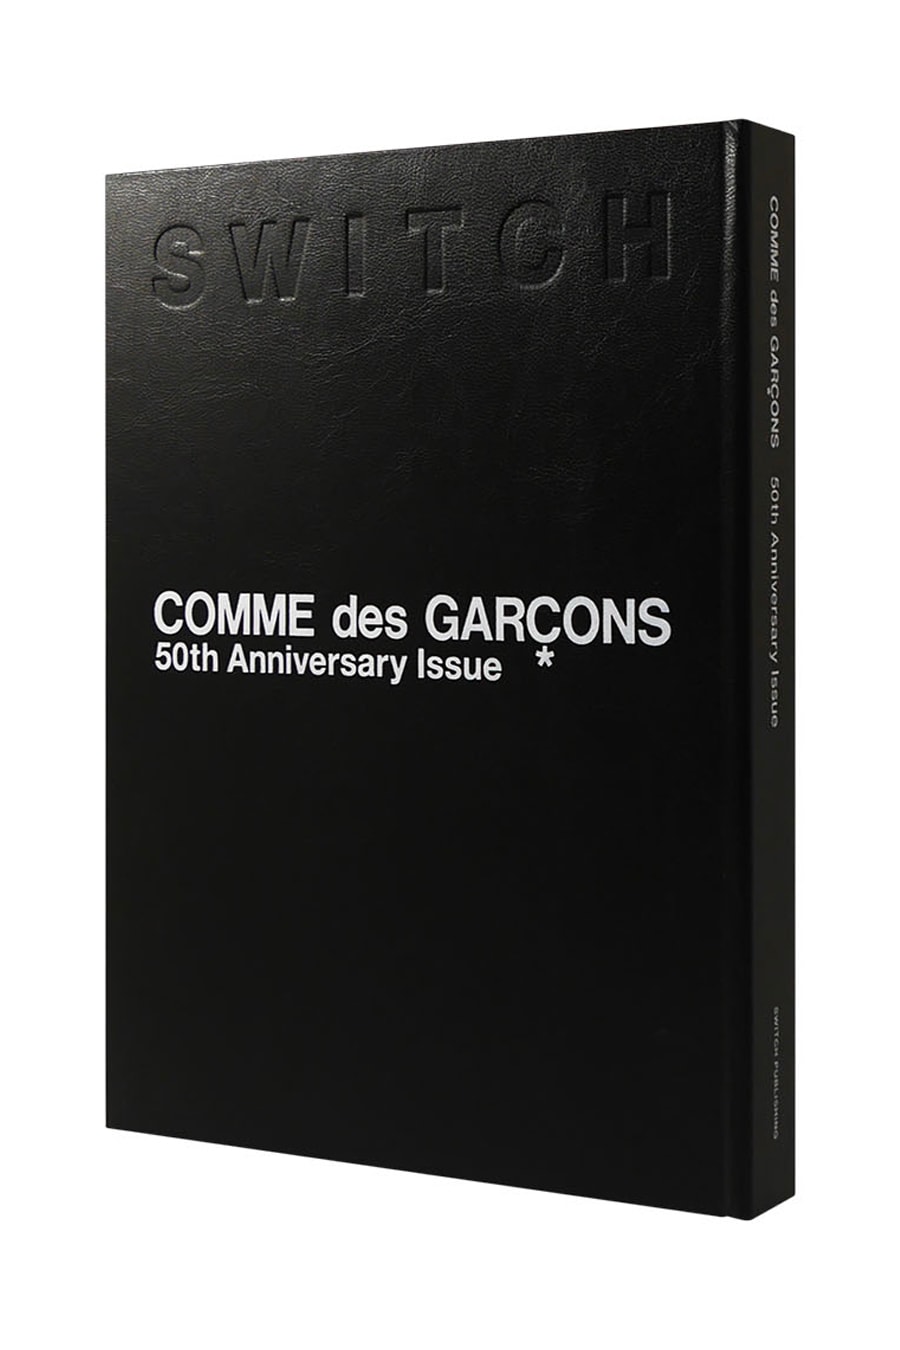 switch magazine comme des garcons 50th anniversary issue images